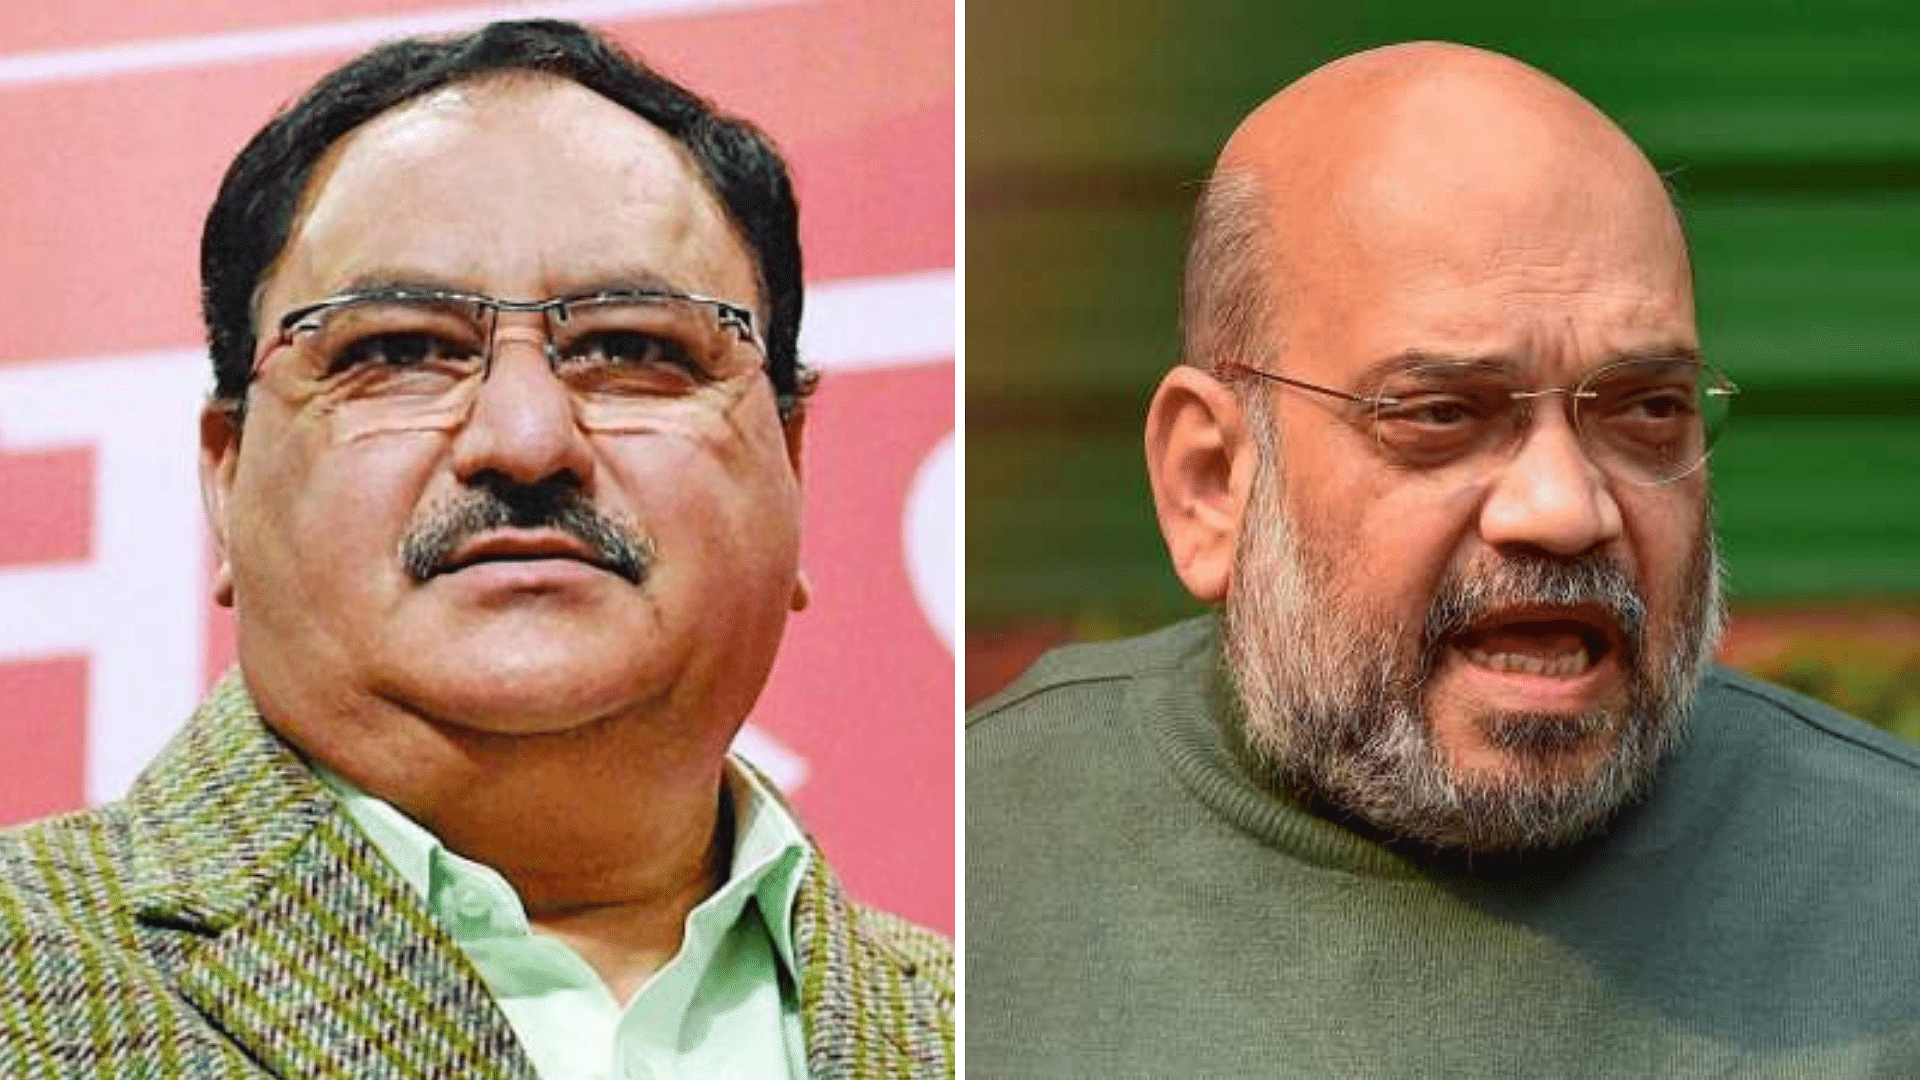 BJP leader JP Nadda and the new Cabinet Minister, Amit Shah.